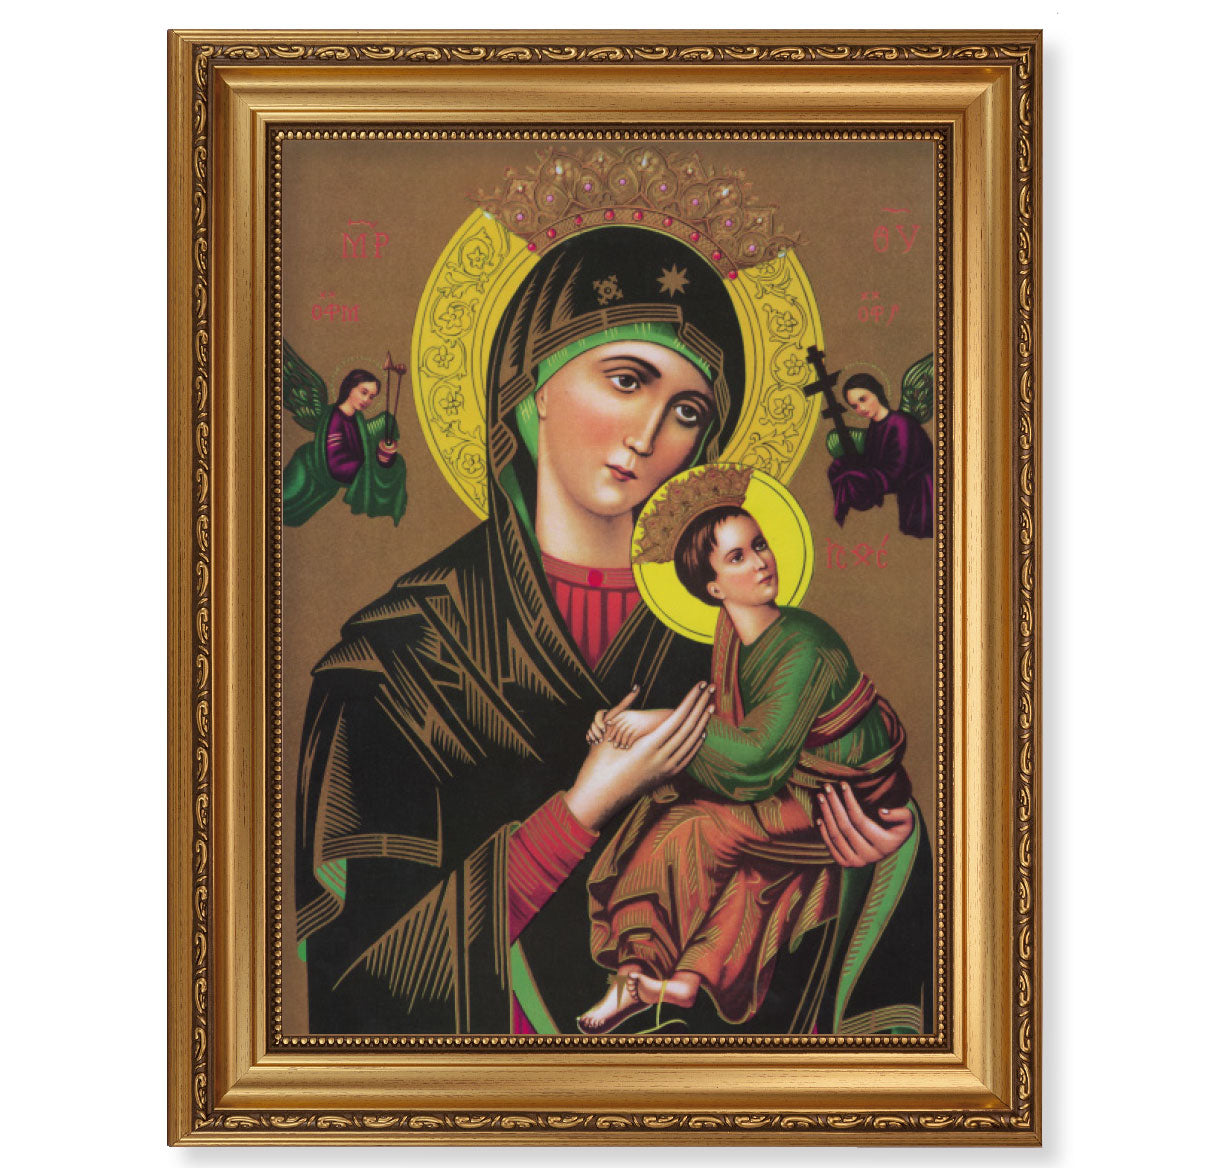 Our Lady of Perpetual Help Antique Gold Framed Art